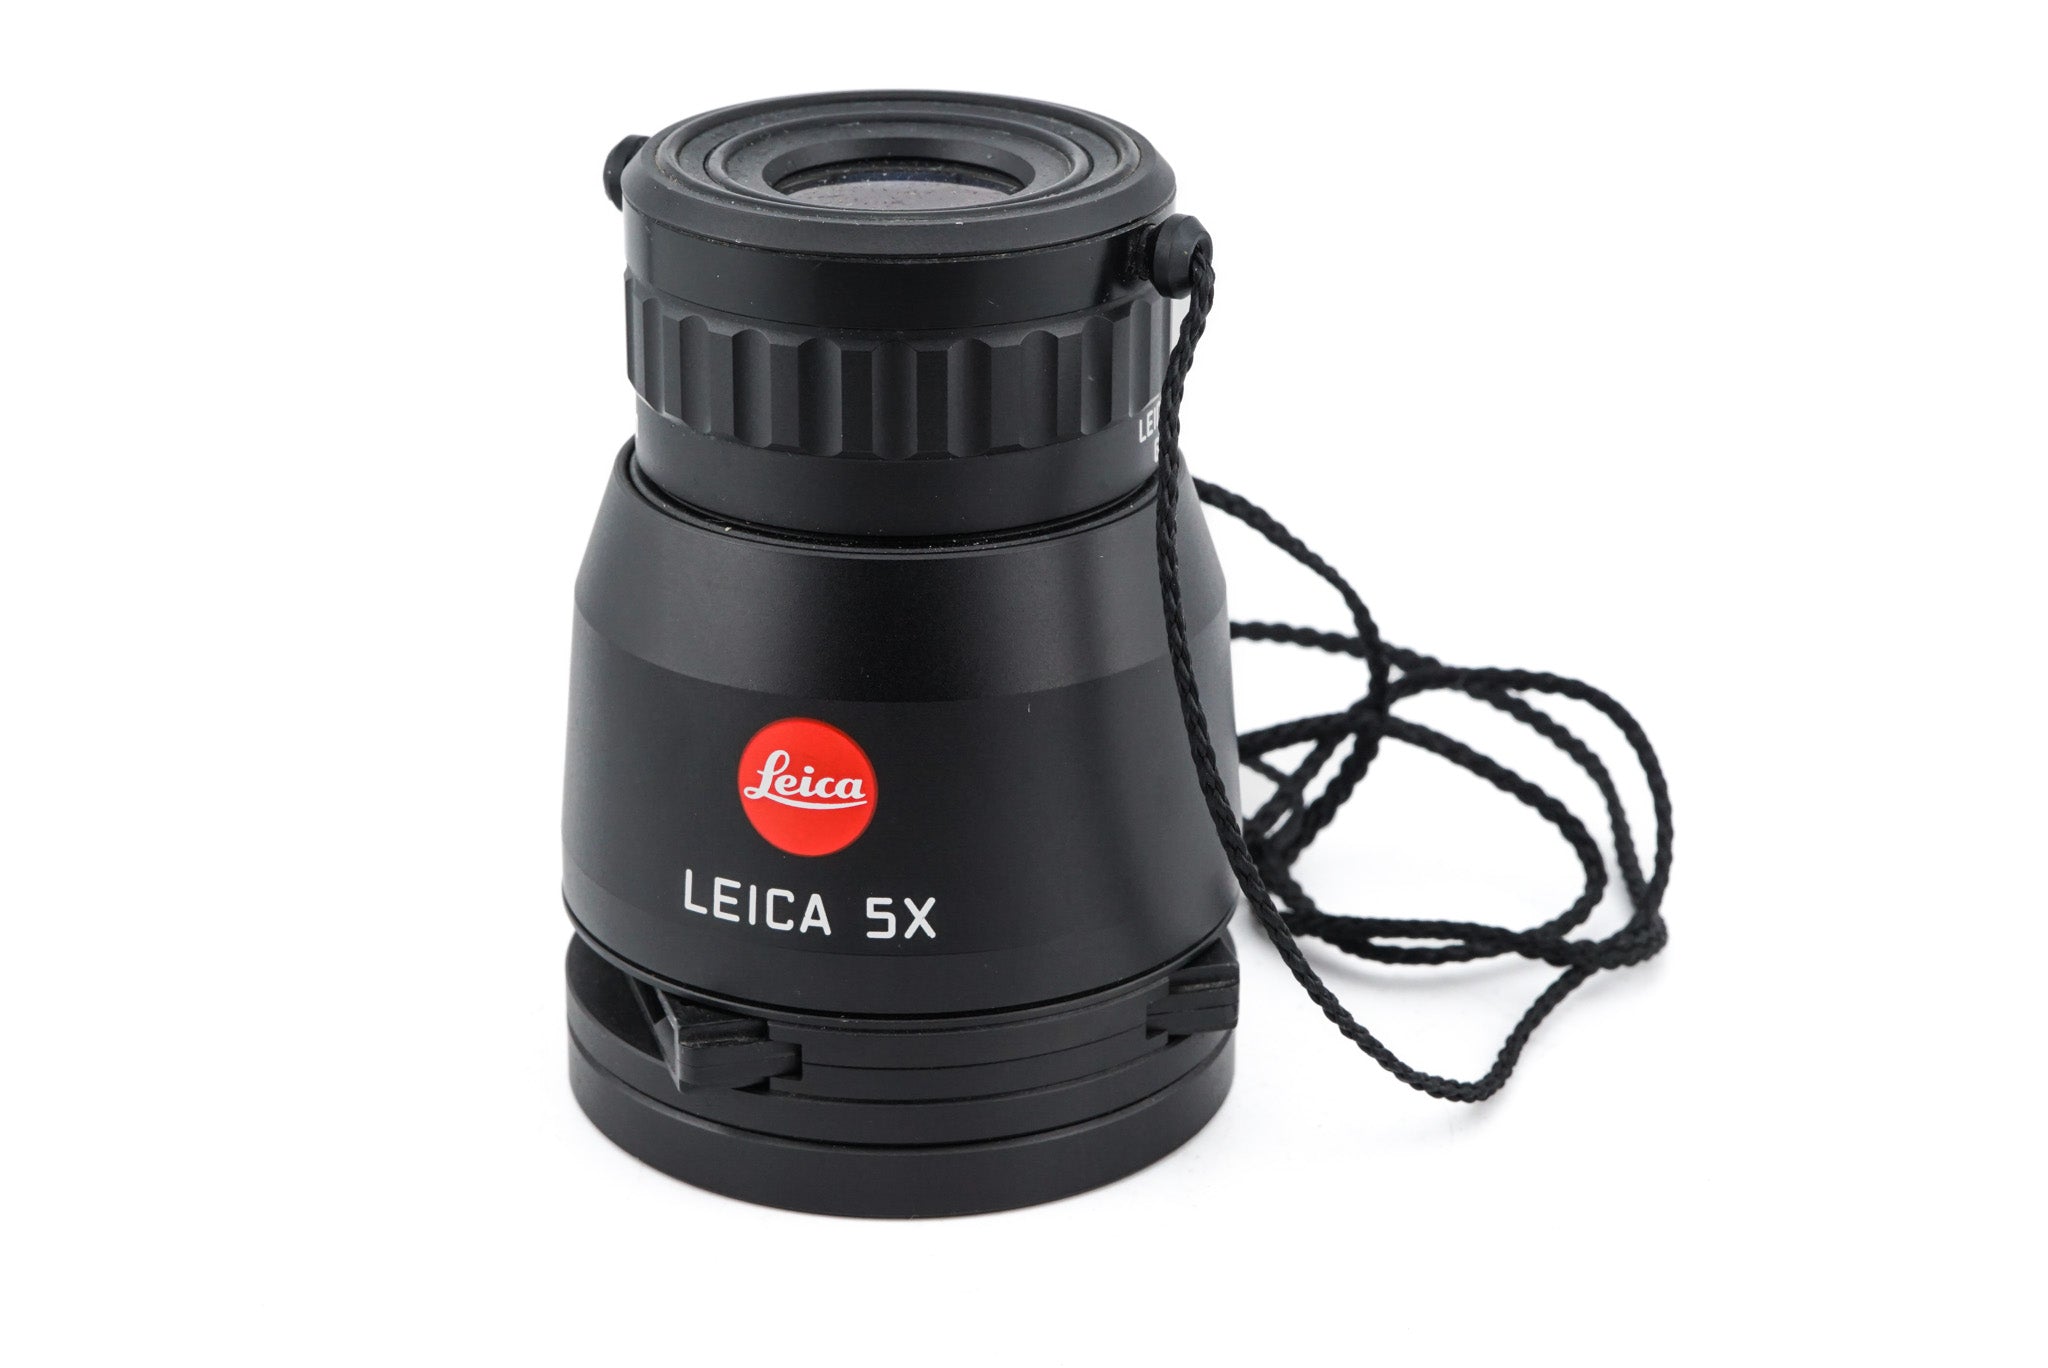 Leica Universal-Lupe 5x (37350) - Accessory